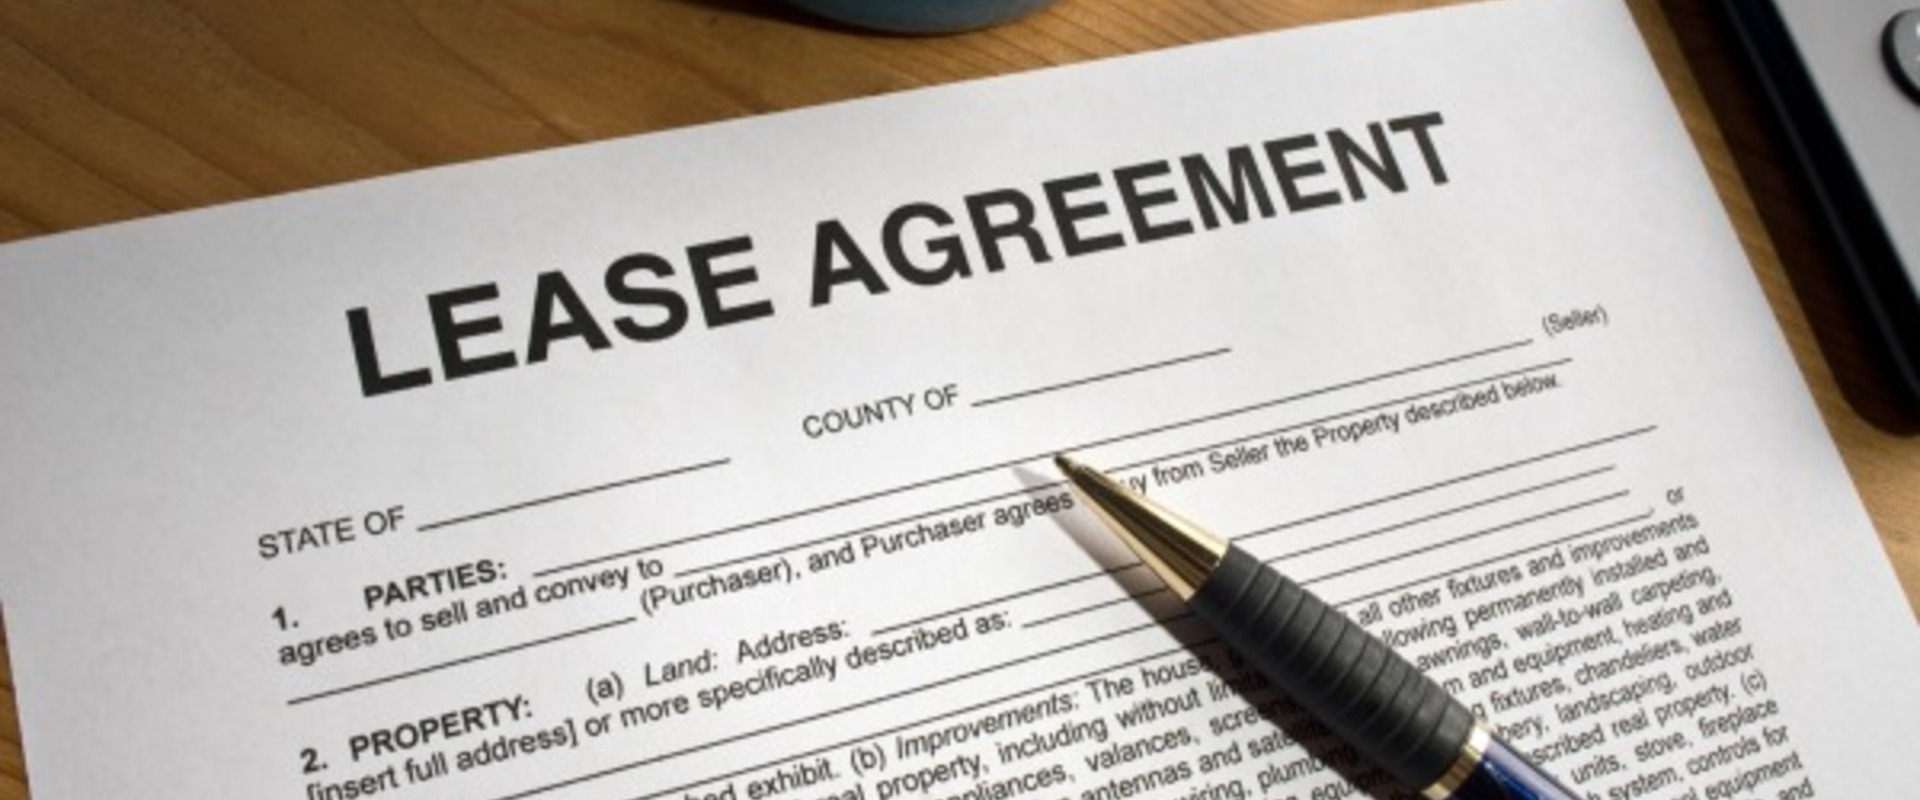 What is a lease agreement?